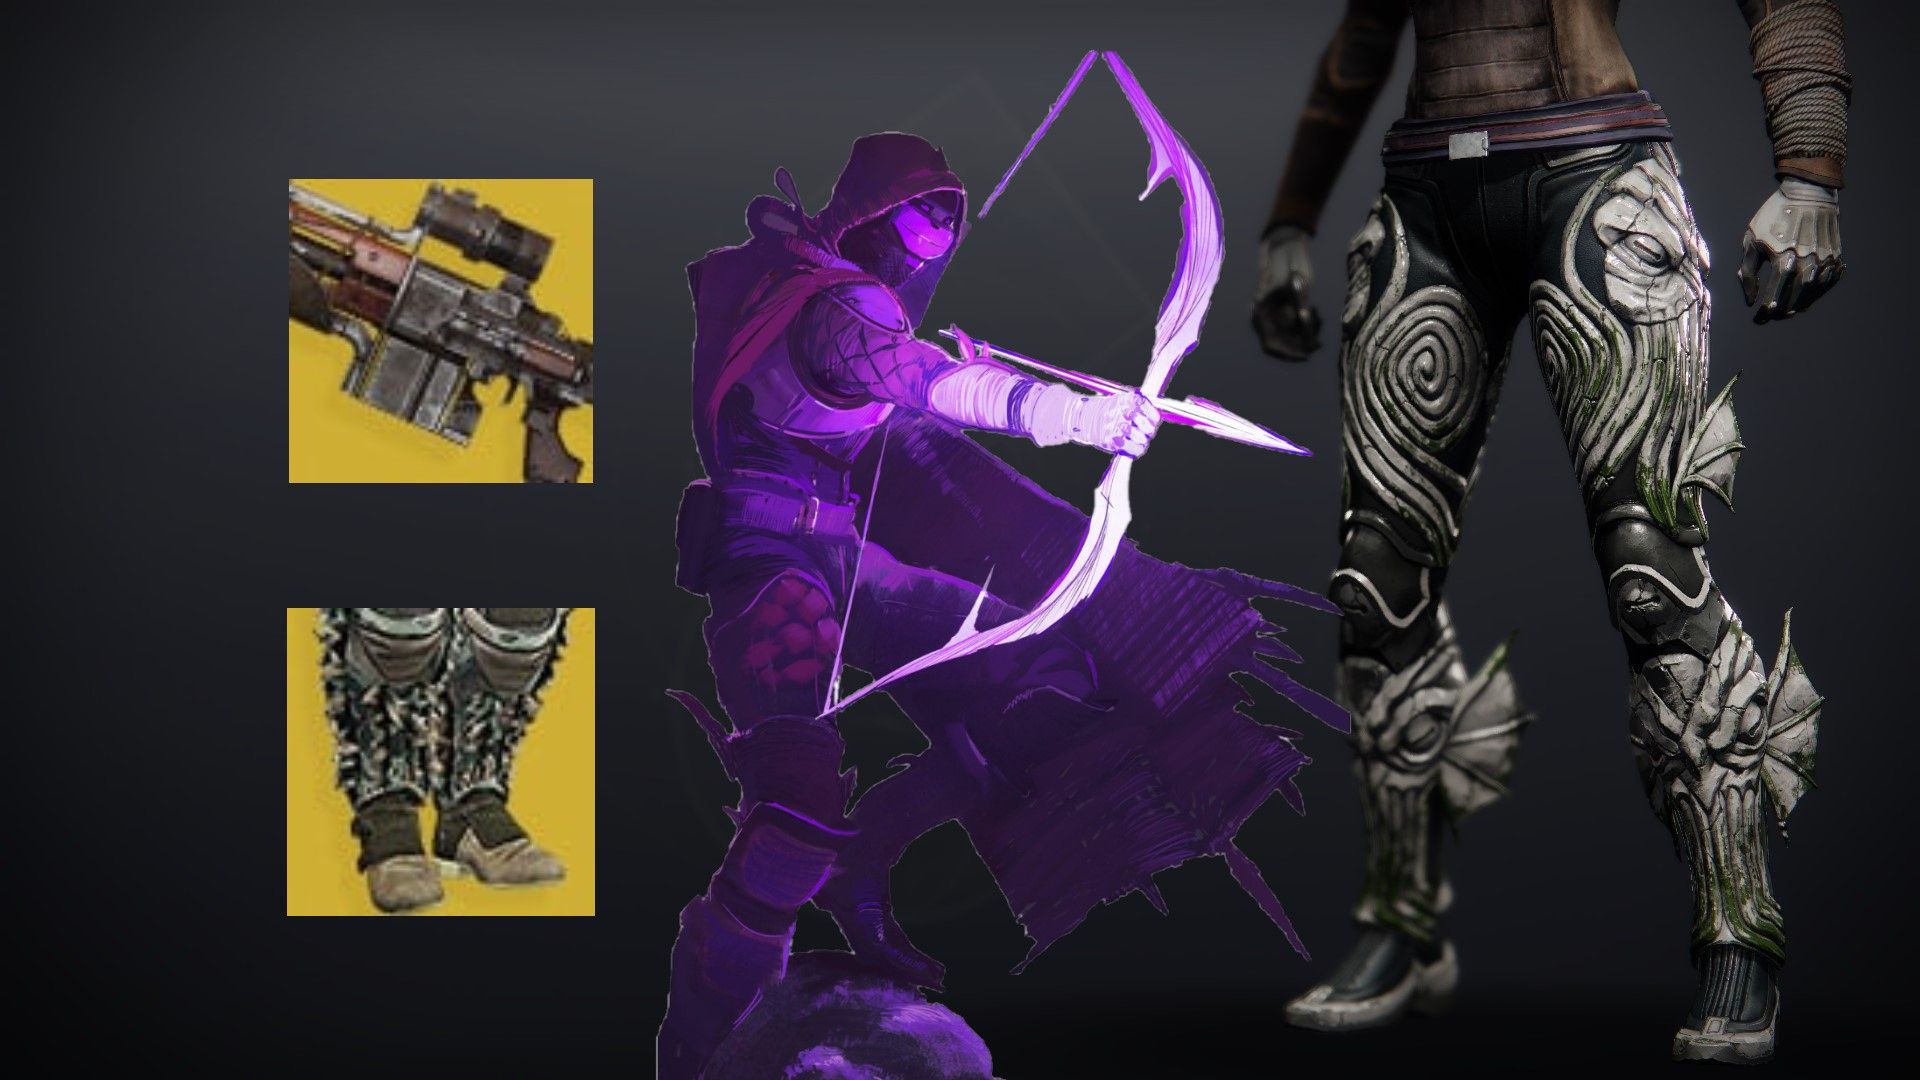 destiny 2 the witch queen void 3.0 update guide void hunter best dps loadout build orpheus rig star-eater scales exotics moebius quiver super damage mods weapons to use